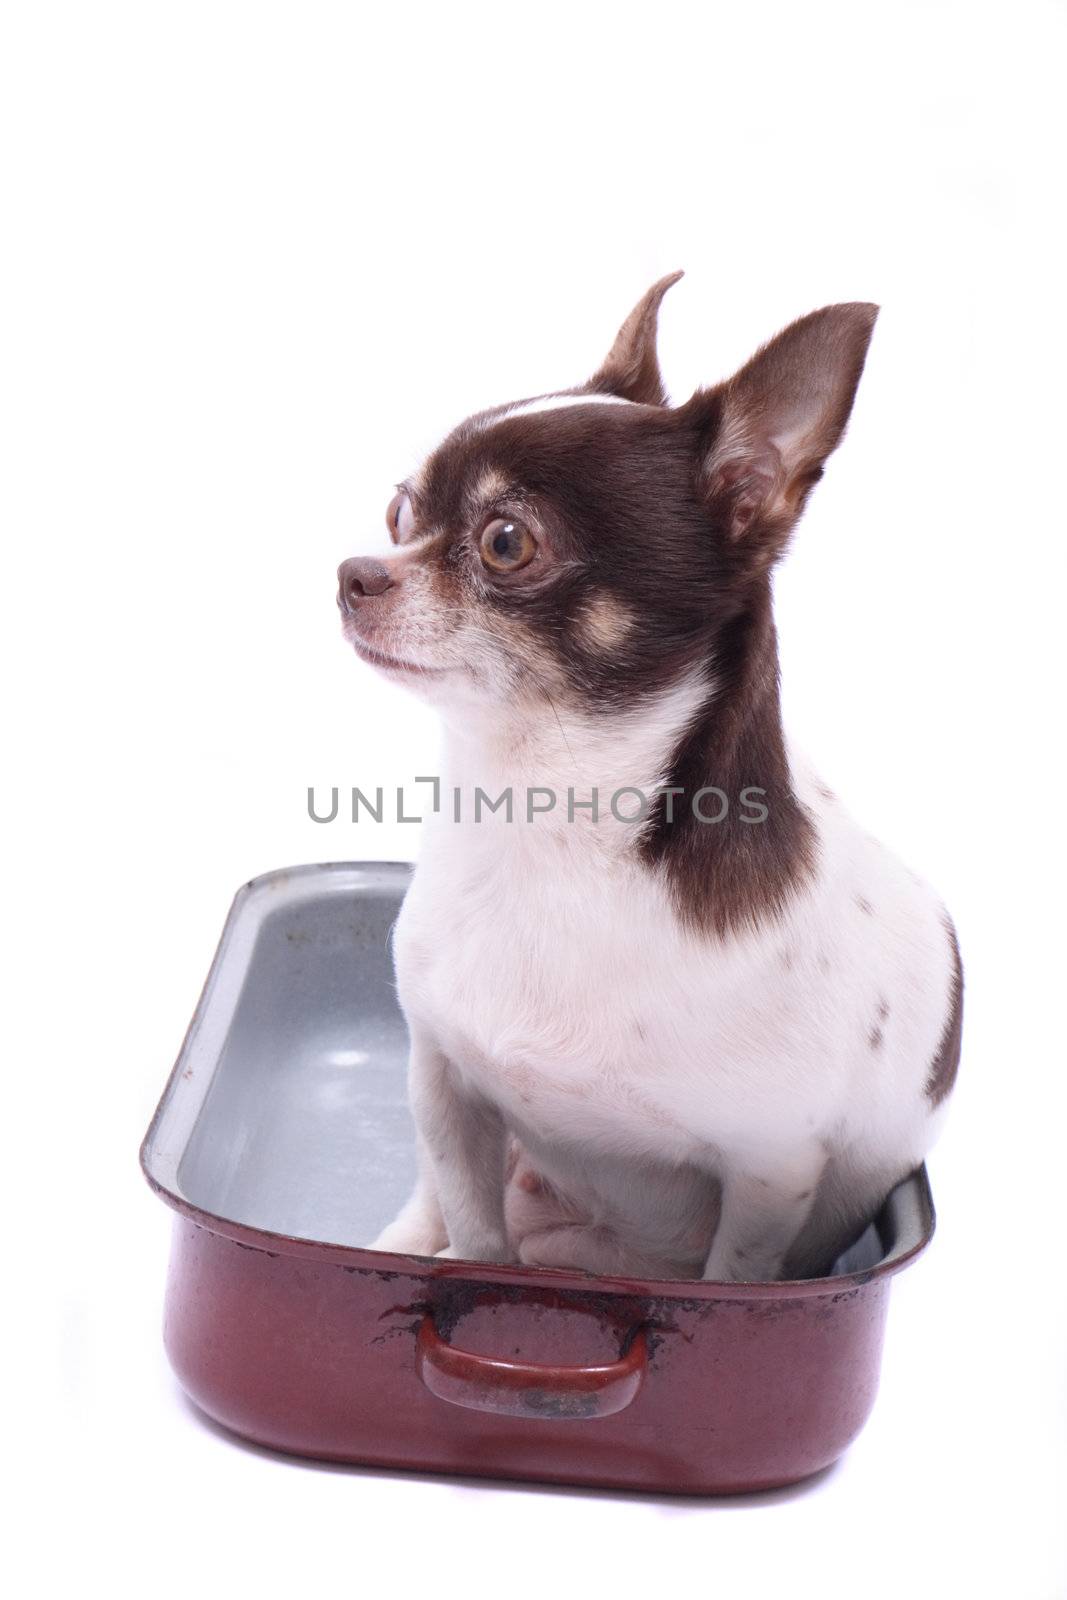 chihuahua in the pot on the white background